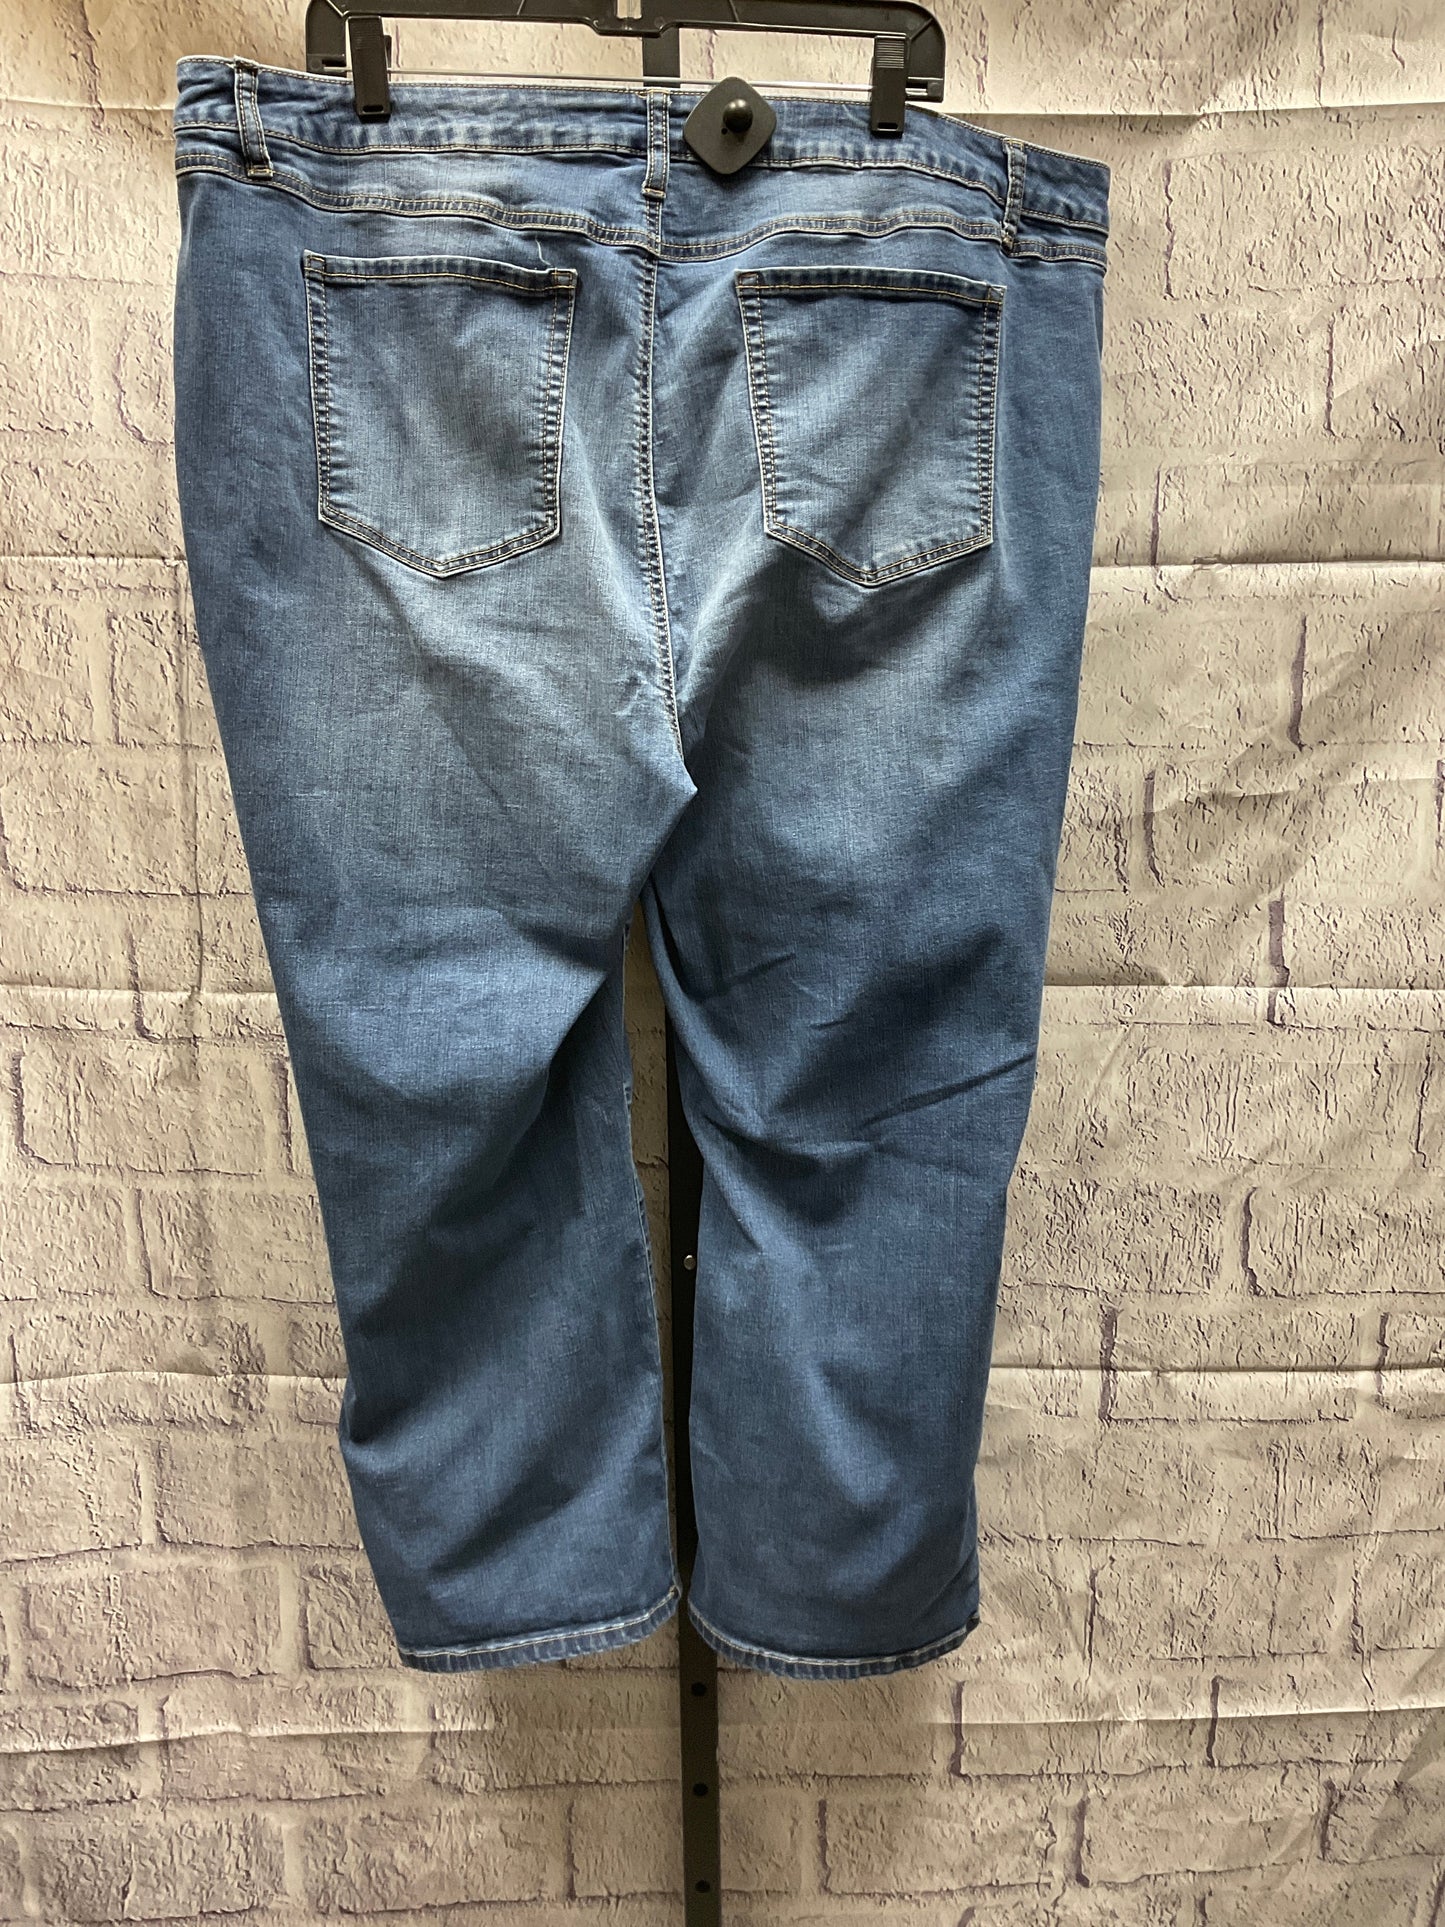 Jeans Relaxed/boyfriend By Cato  Size: 22